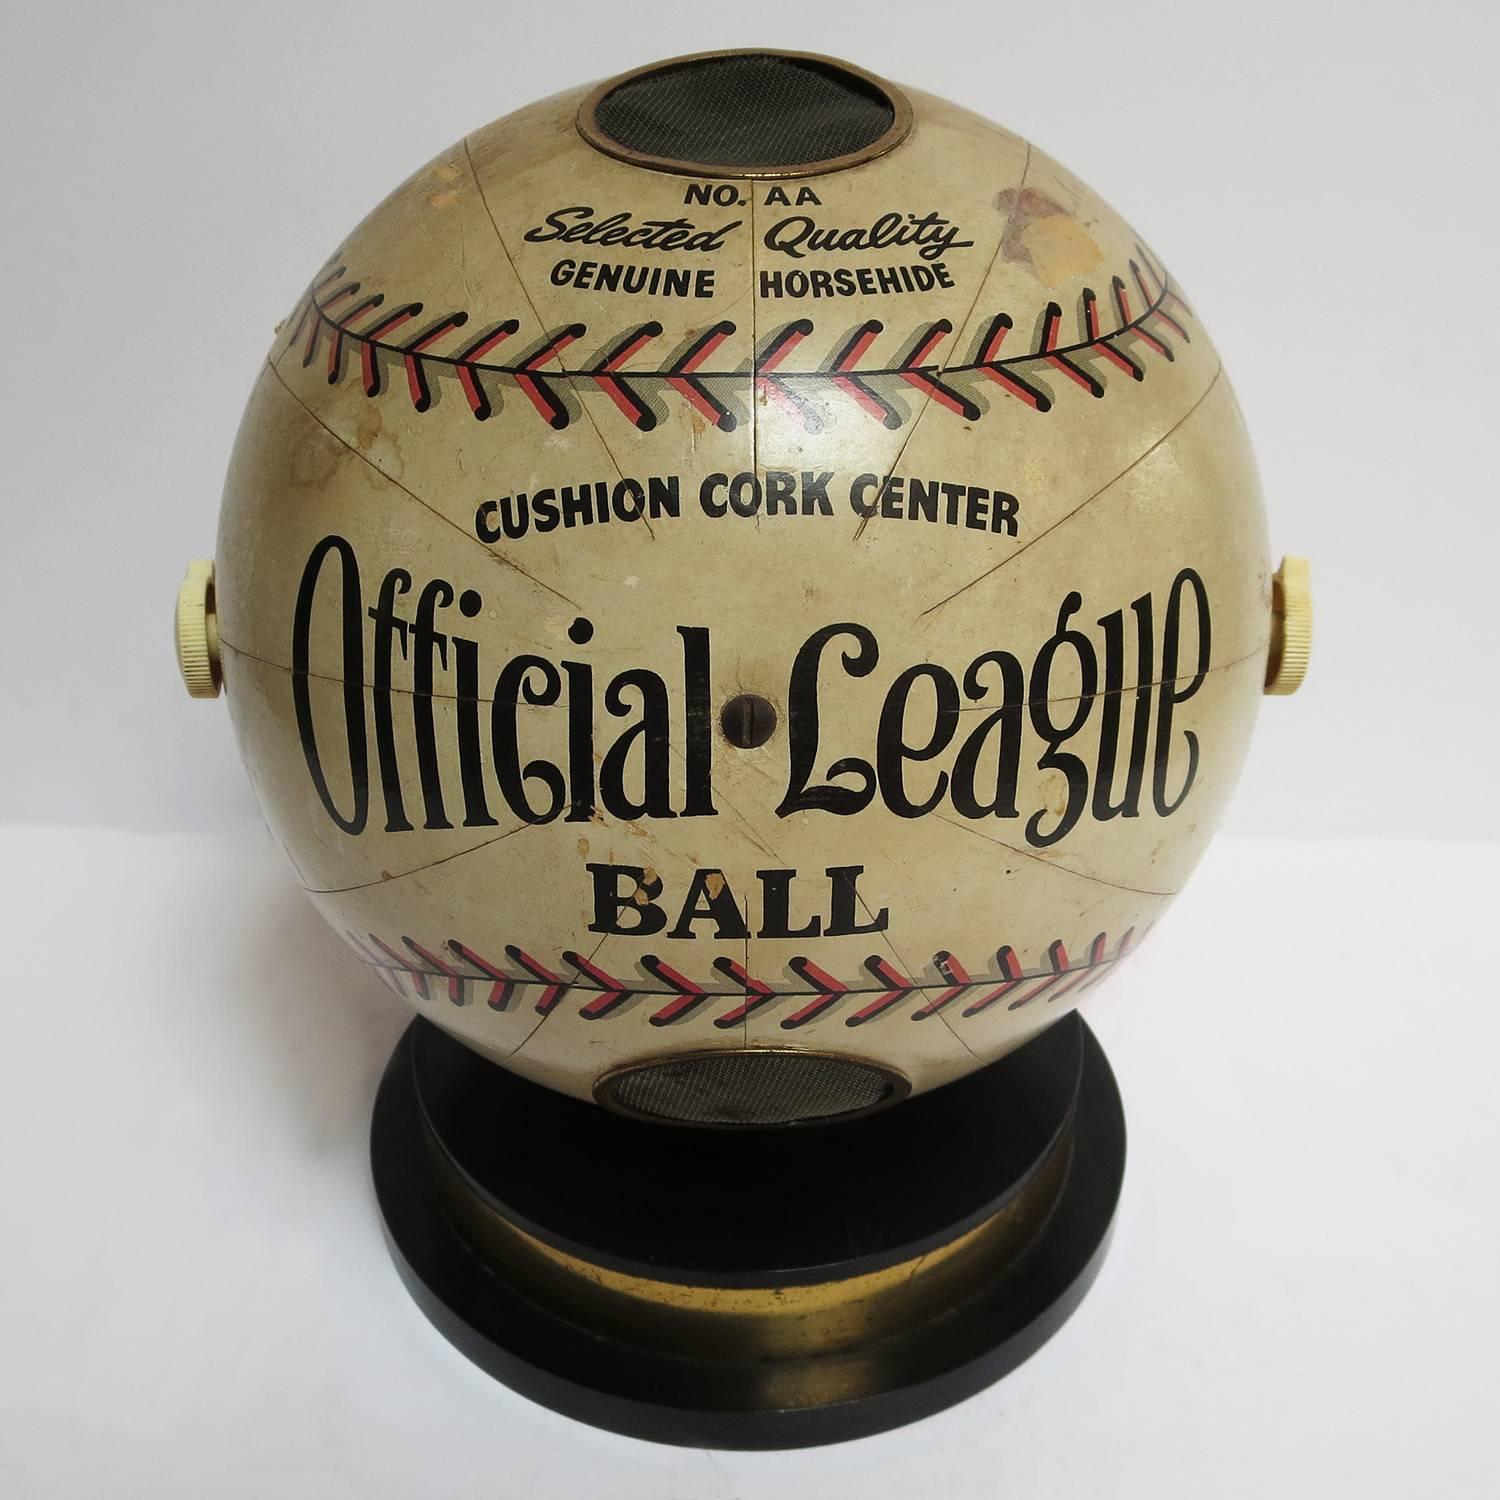 What better way to listen in to the baseball game than on your own baseball radio? This unique novelty set was made by the Trophy company, along with a plastic bowling ball radio! Our set is made of painted cardboard, similar to a world globe model.